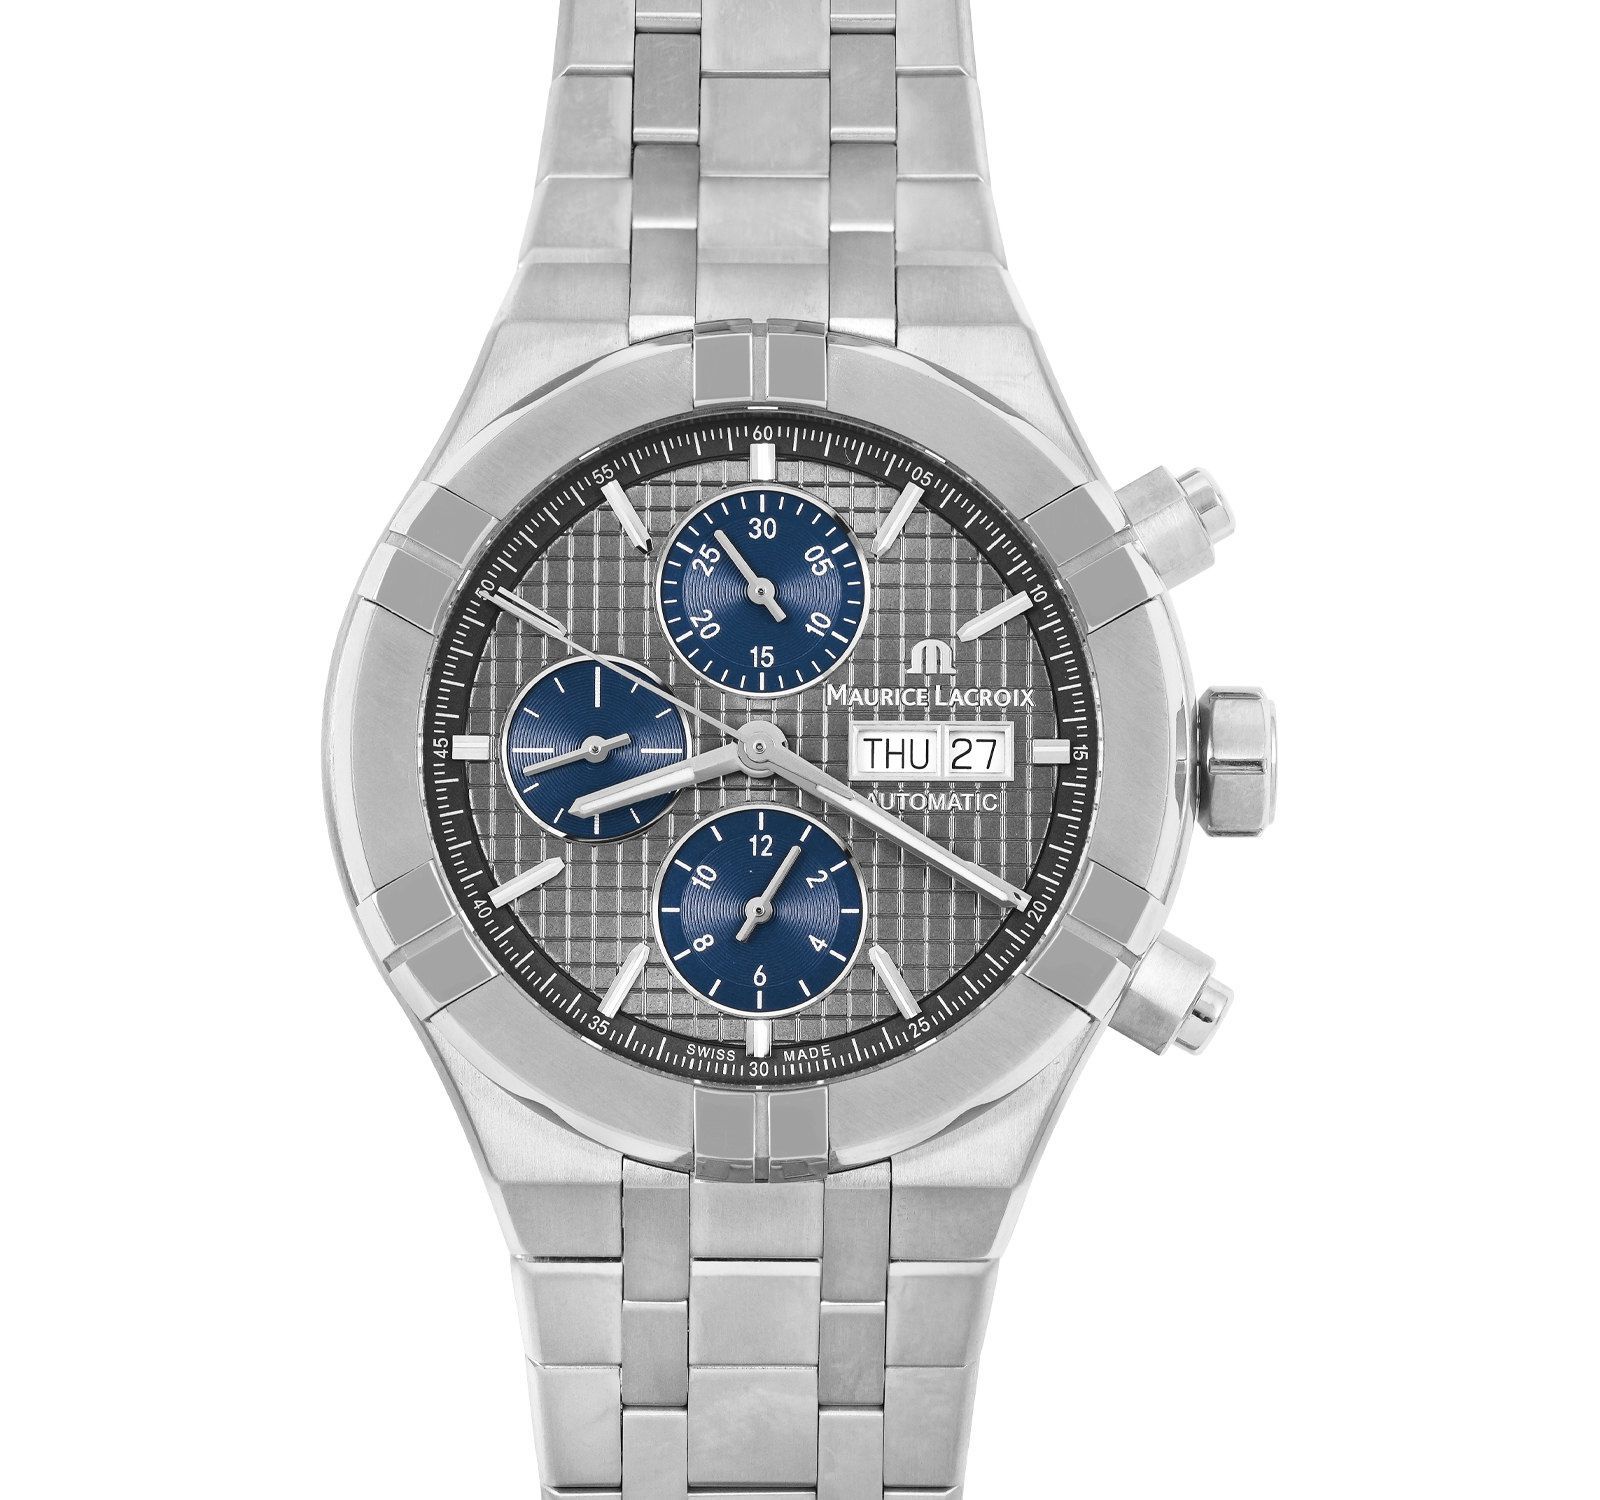 AI6038-TT032-330-1 Pre-Owned Lacroix Buy Aikon Maurice